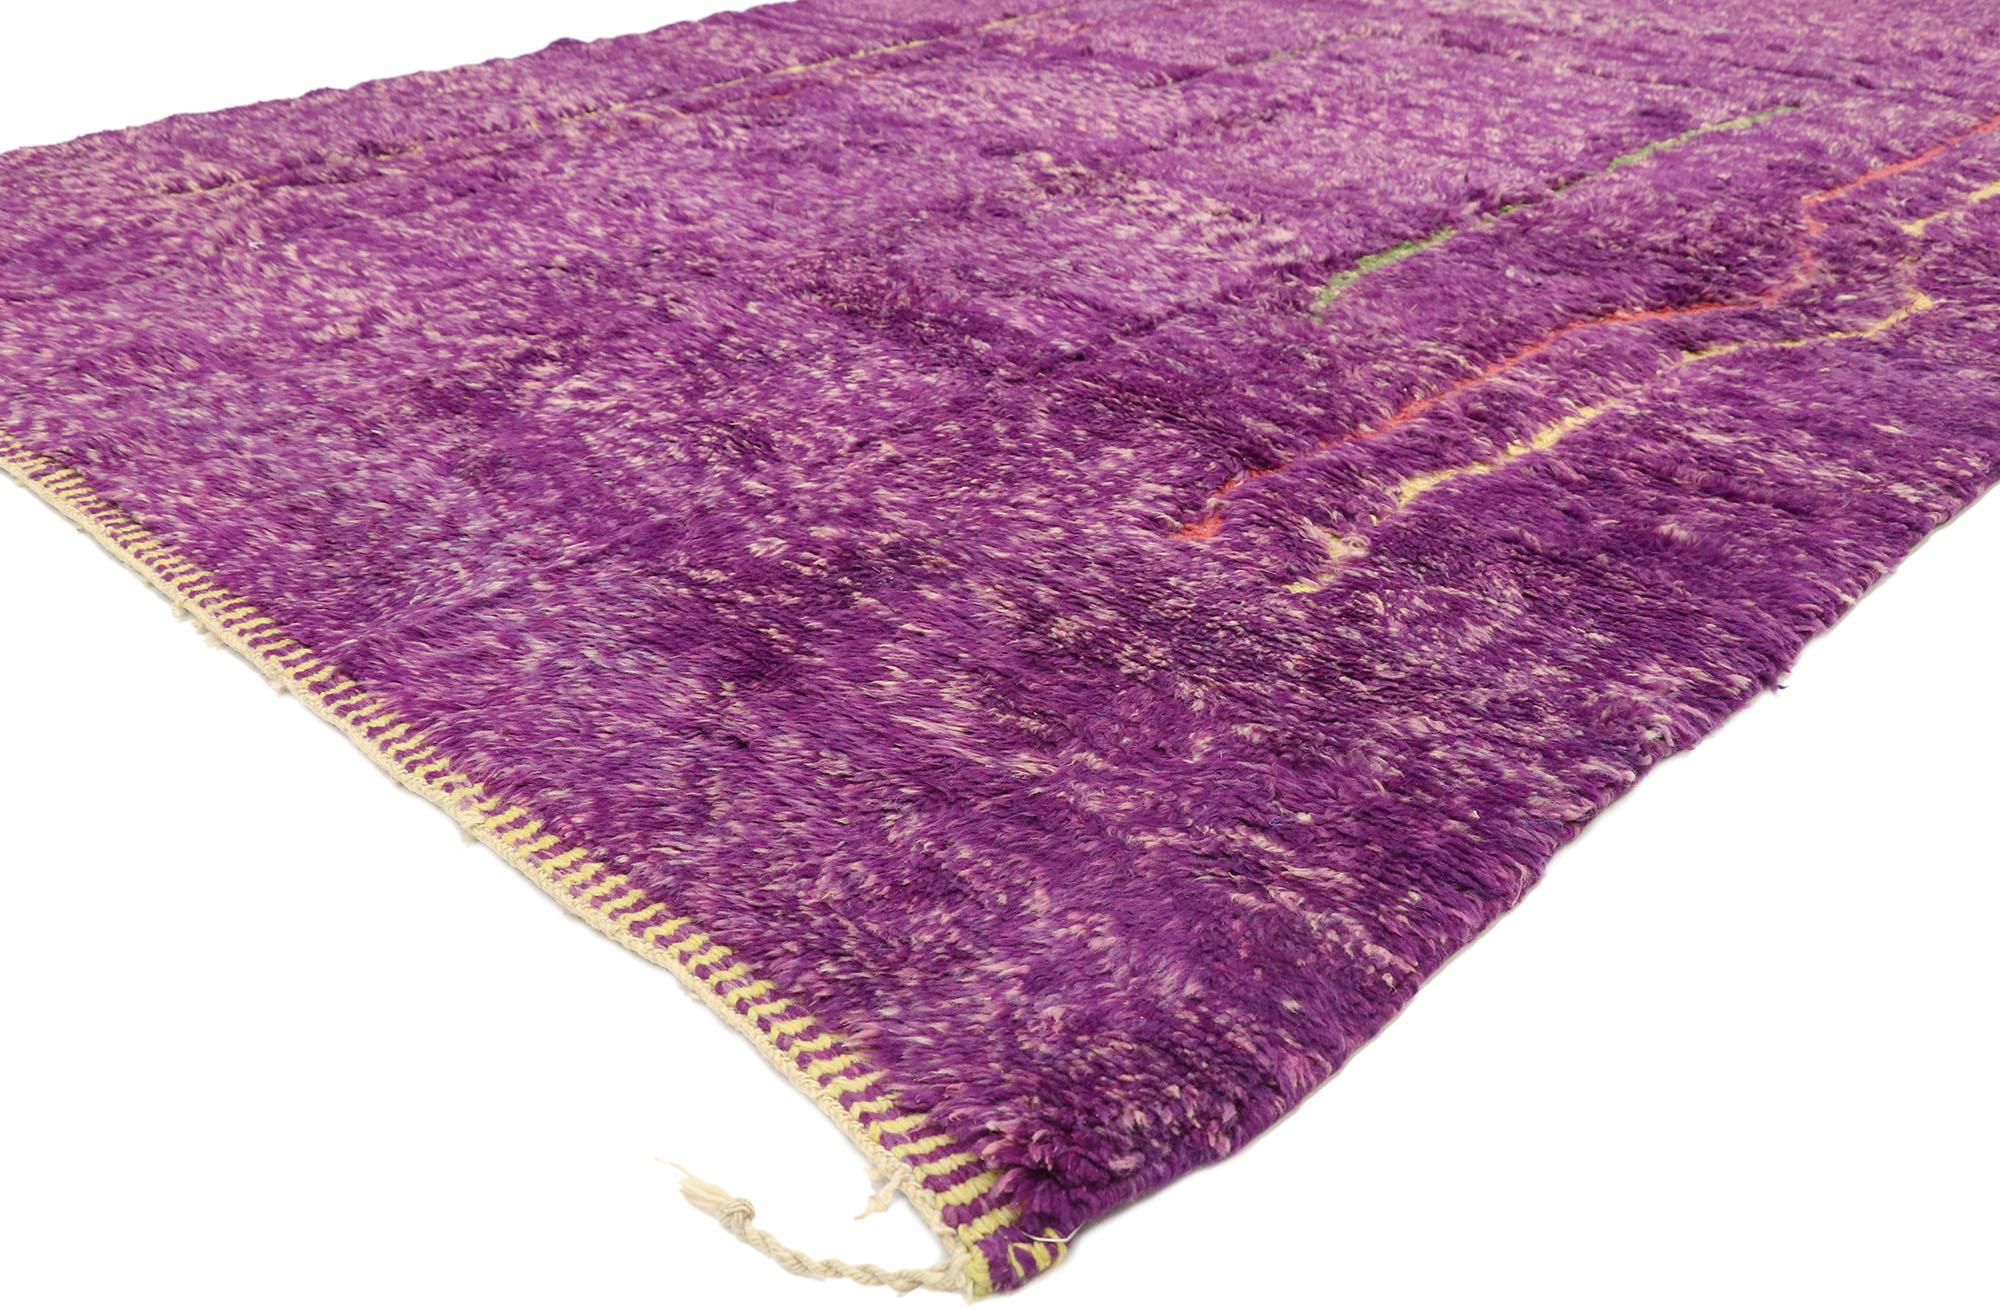 21049 New Purple Beni Mrirt Moroccan Rug, 06'10 x 10'00. Beni Mrirt rugs exemplify the esteemed tradition of Moroccan weaving, renowned for their opulent texture, geometric patterns, and soothing earthy tones. Crafted by skilled artisans of the Beni